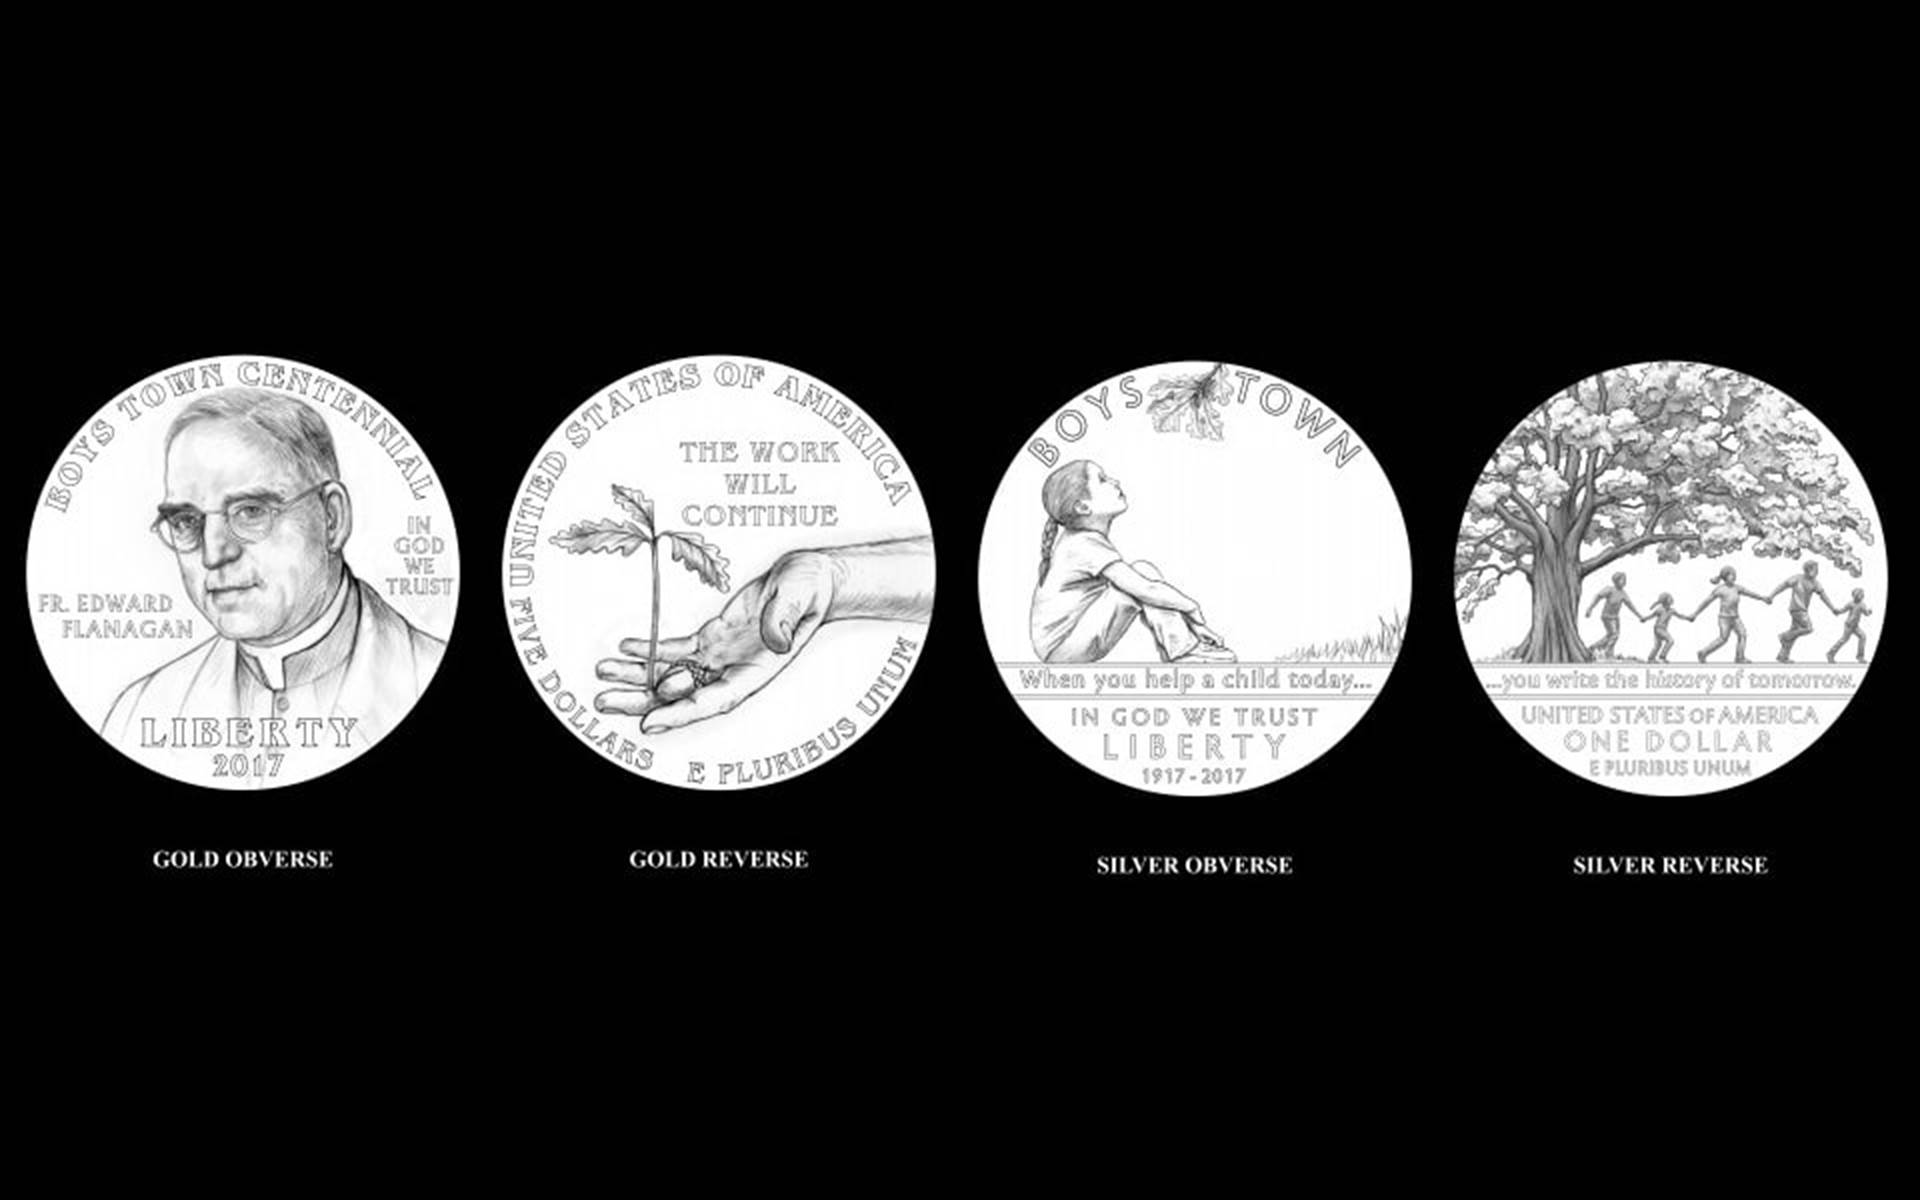 Sides of the commemorative coins